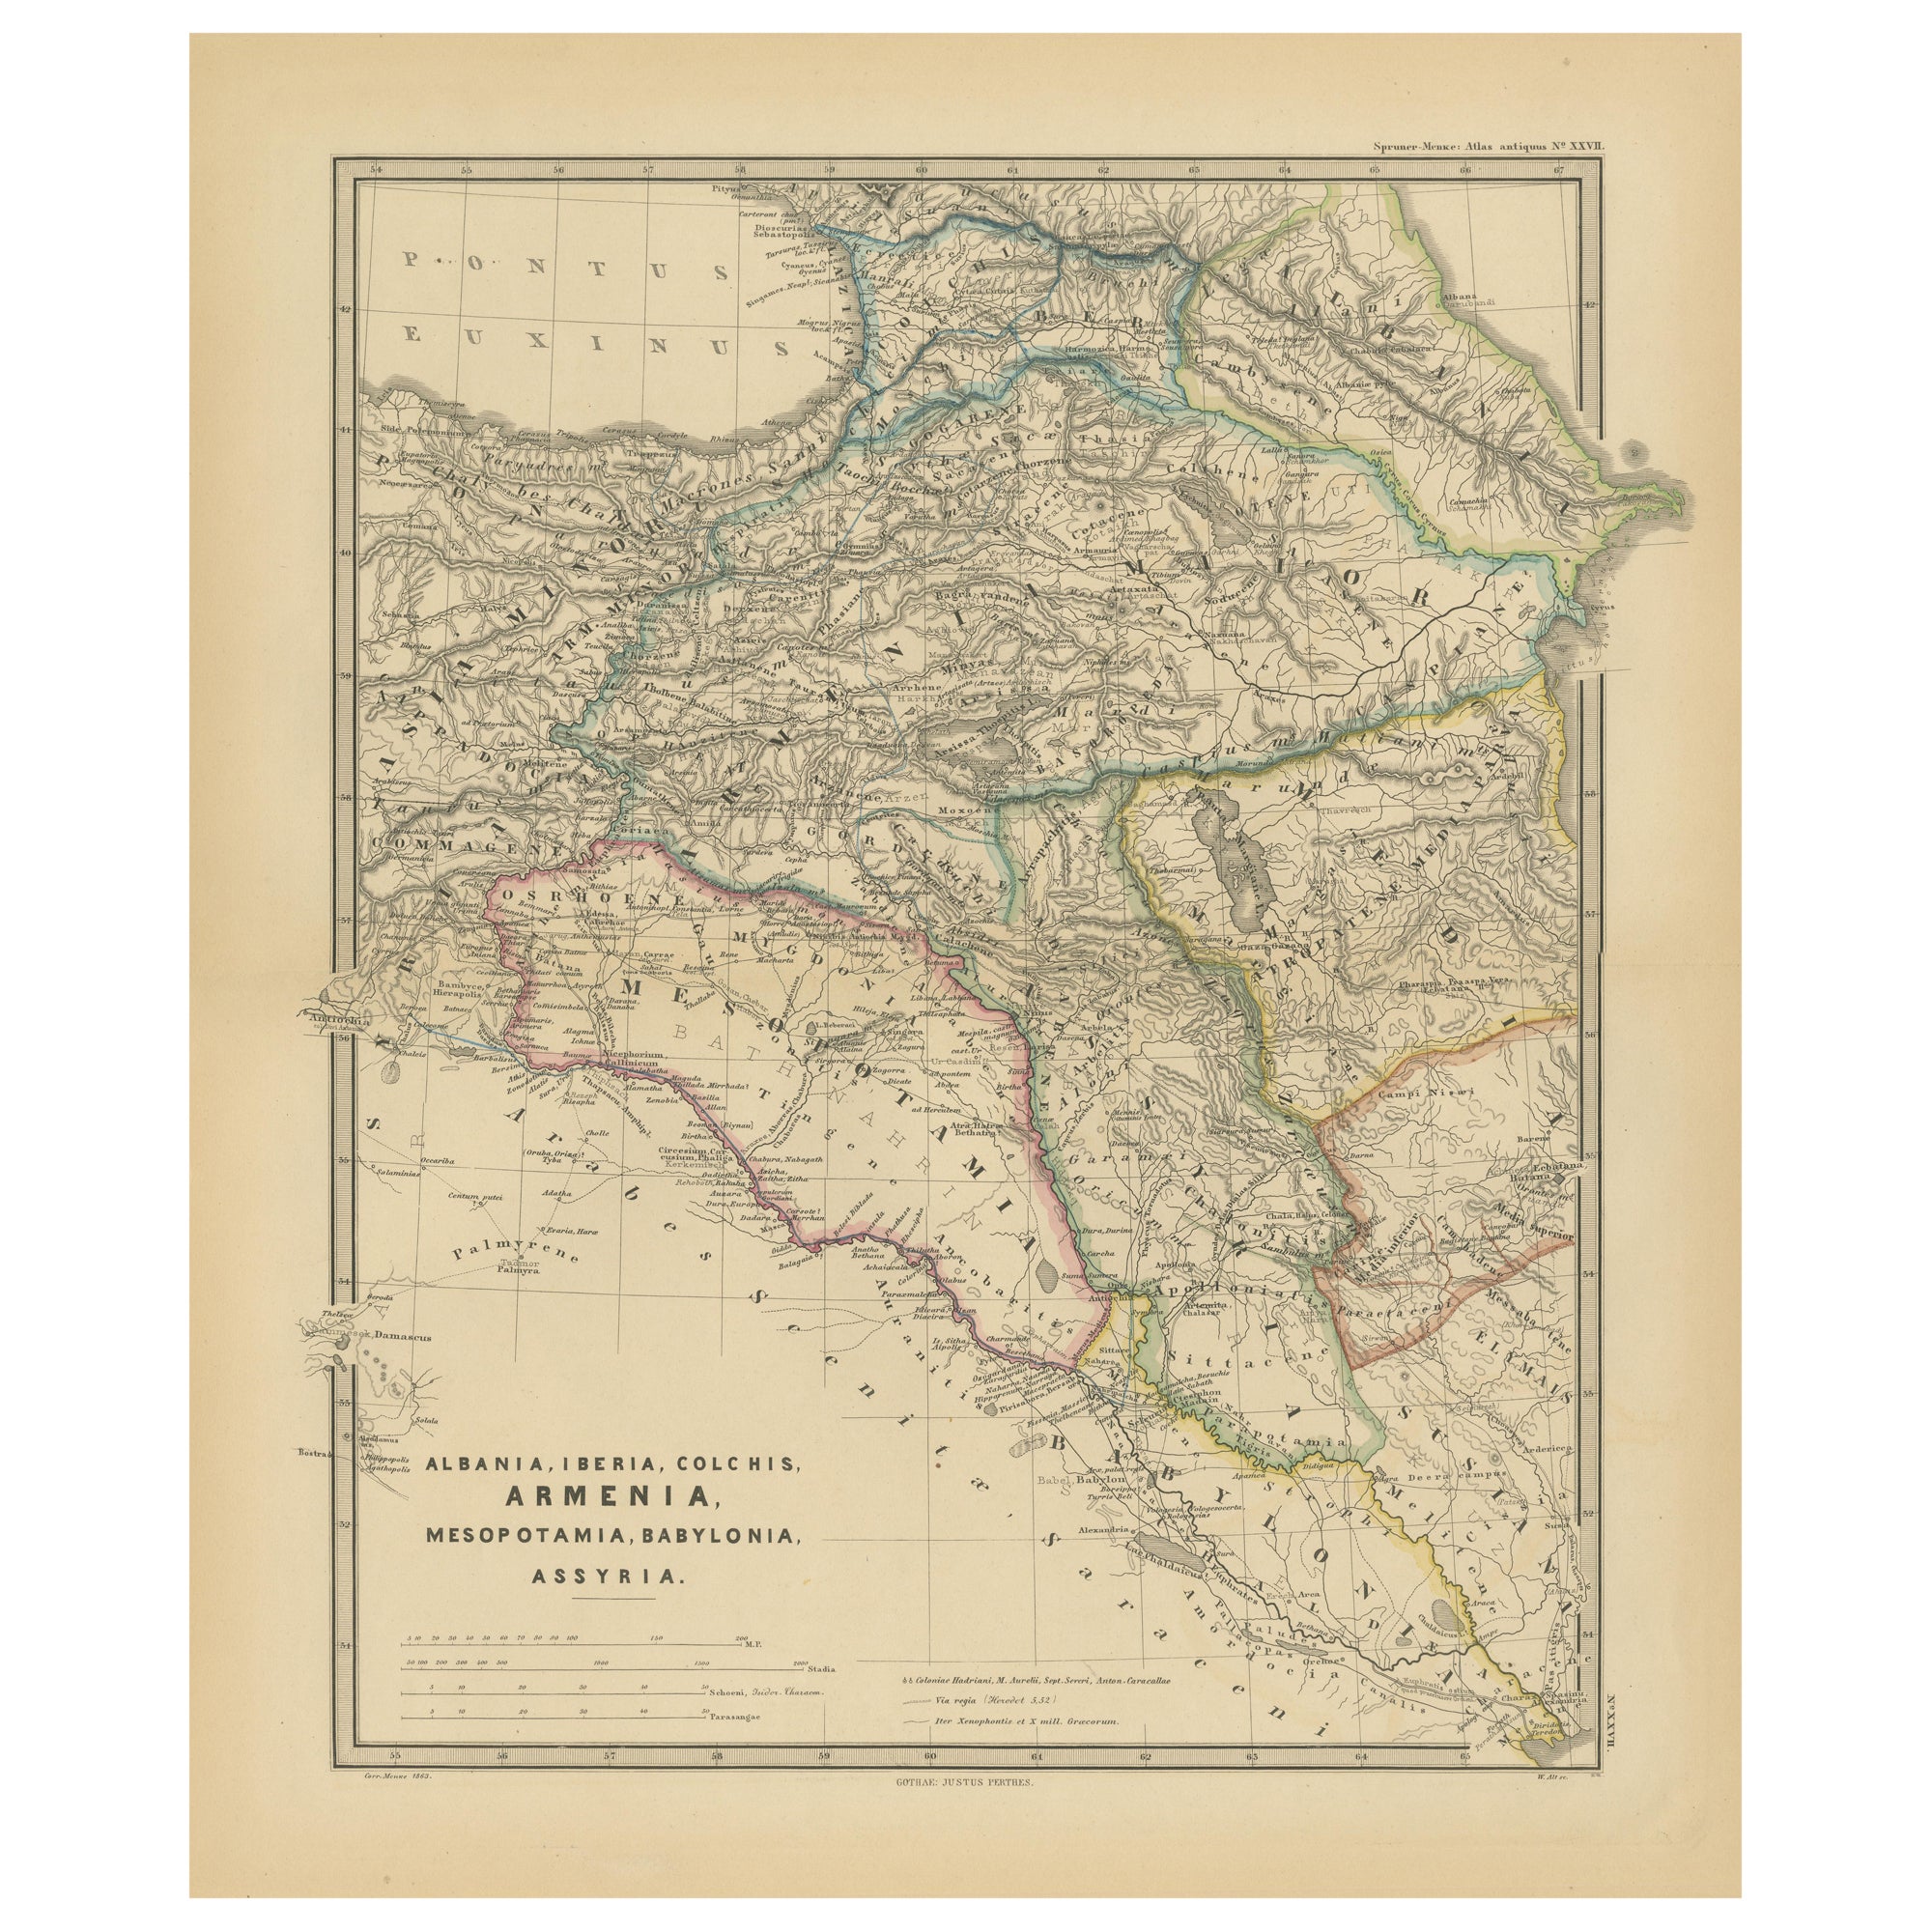 Ancient Crossroads: Albania to Assyria in Antiquity, Published in 1880